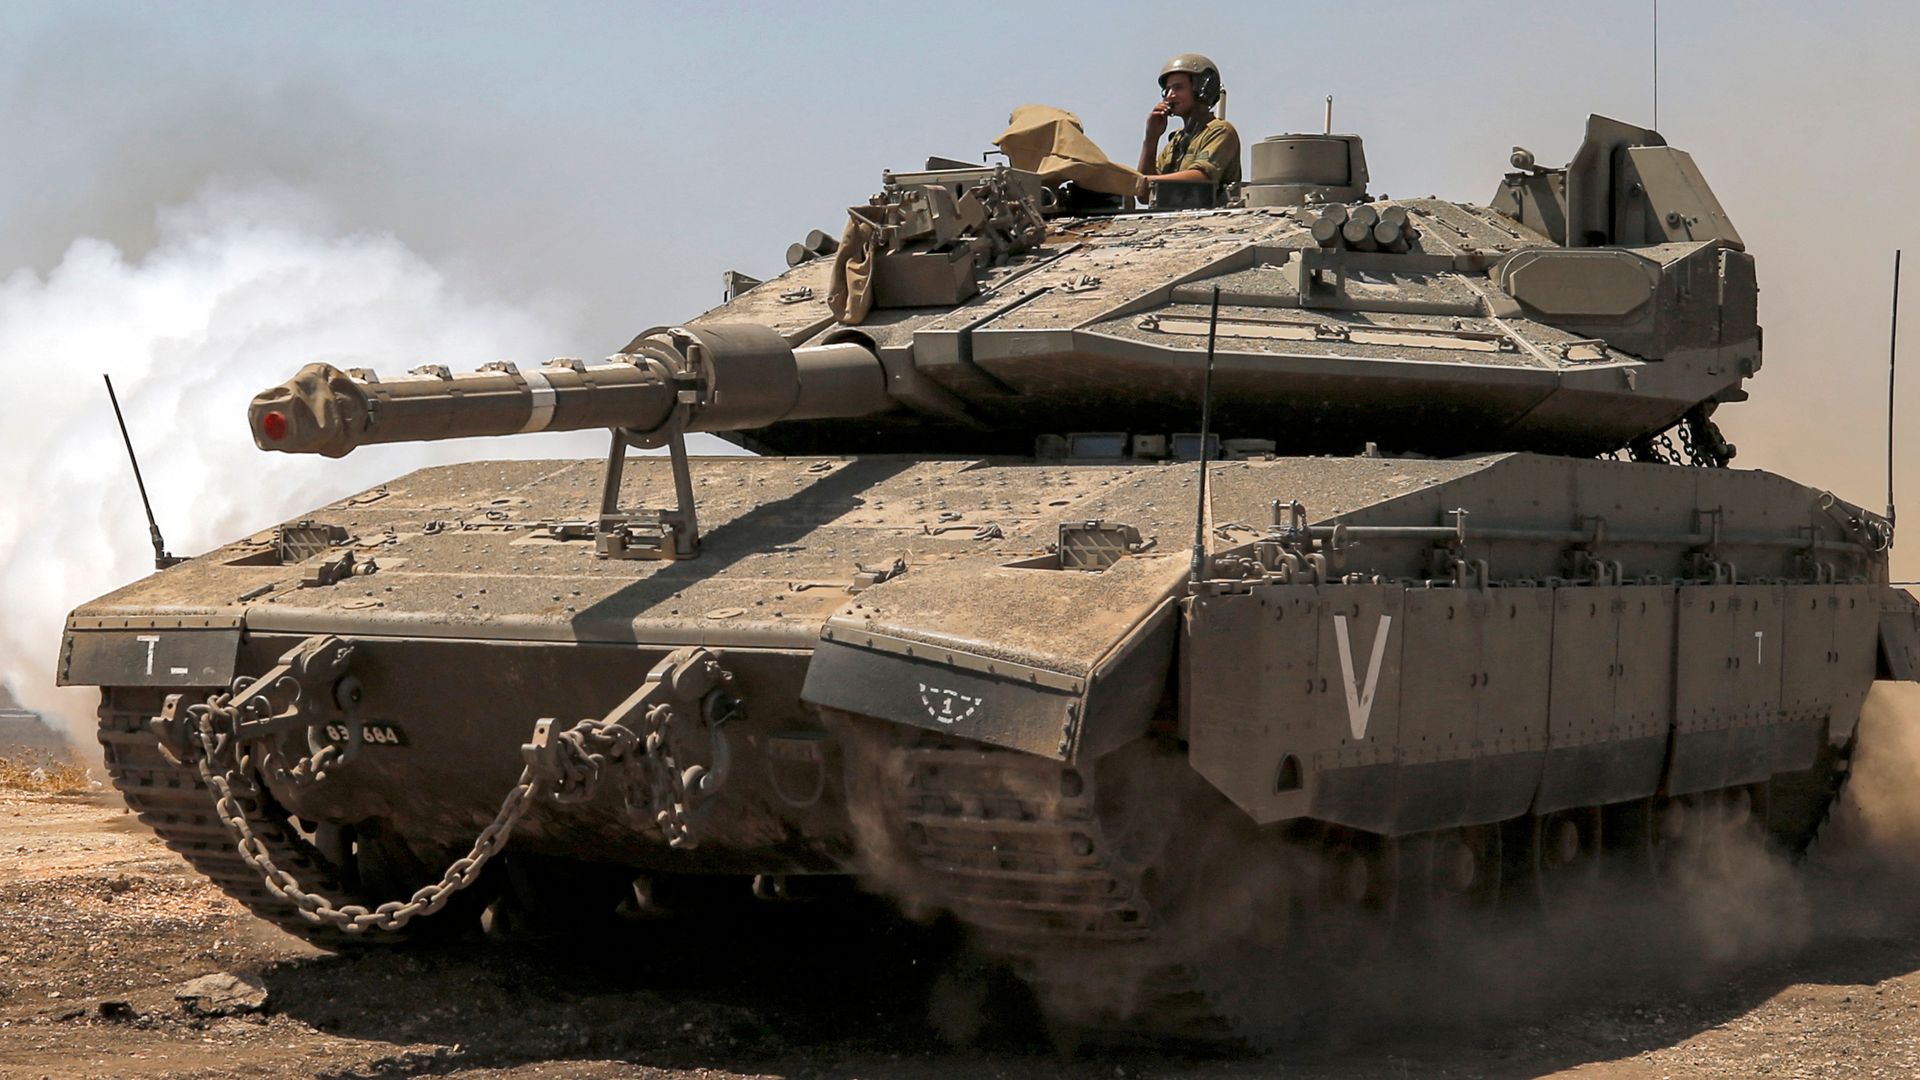 Israel's Merkava tank designed for upcoming fight with Hamas